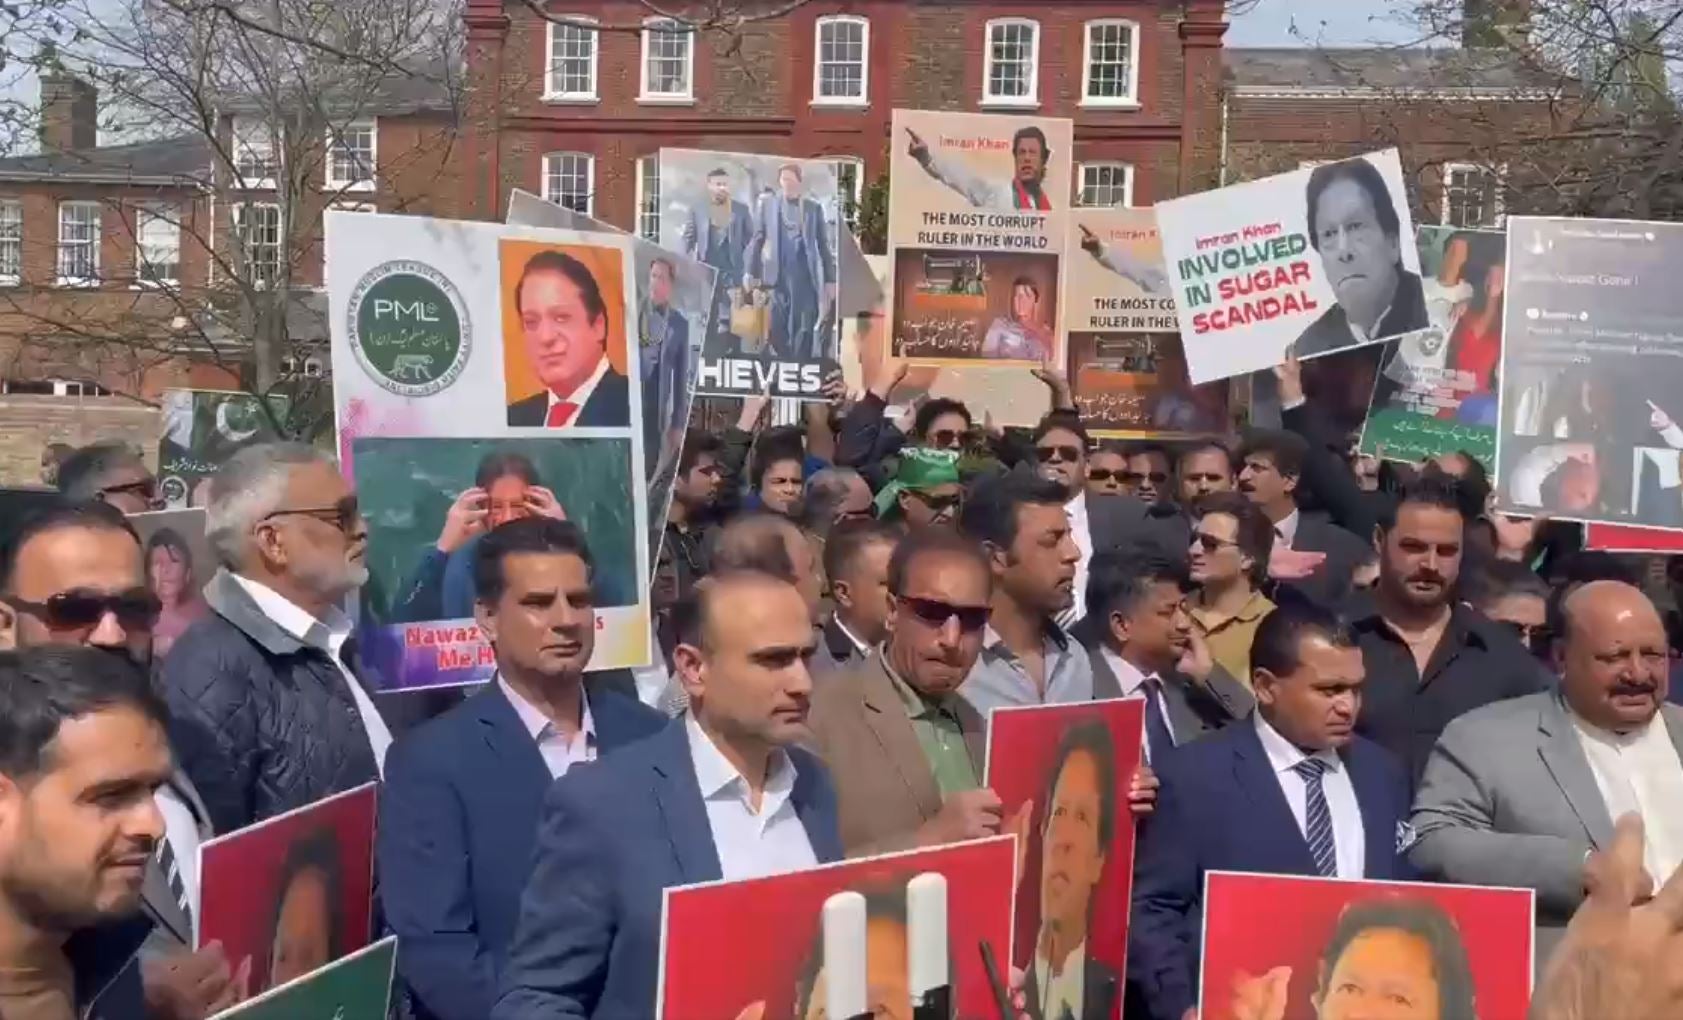 Protesters outside the Surrey home of Jemima Goldsmith’s elderly mother